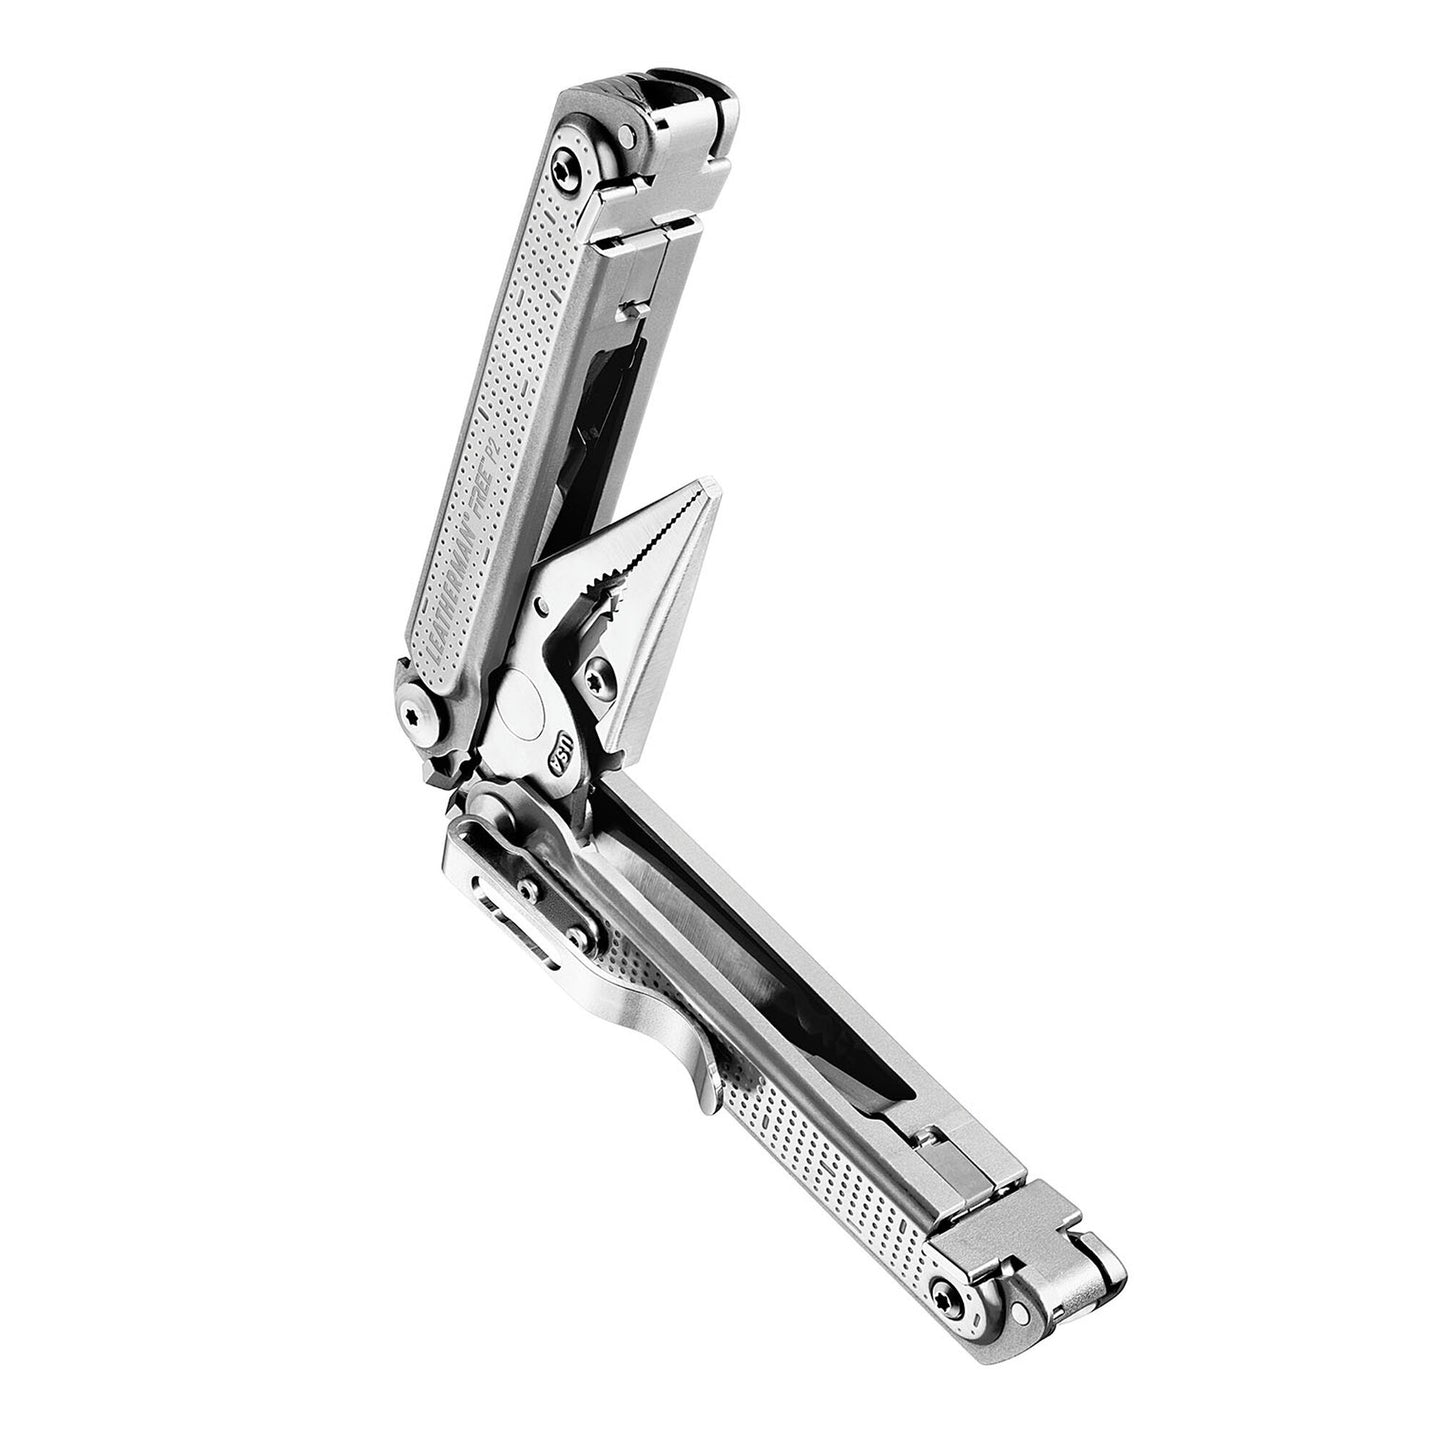 Pince Leatherman Free P2- pince multifonction (19 outils) - Leatherman-T.A DEFENSE